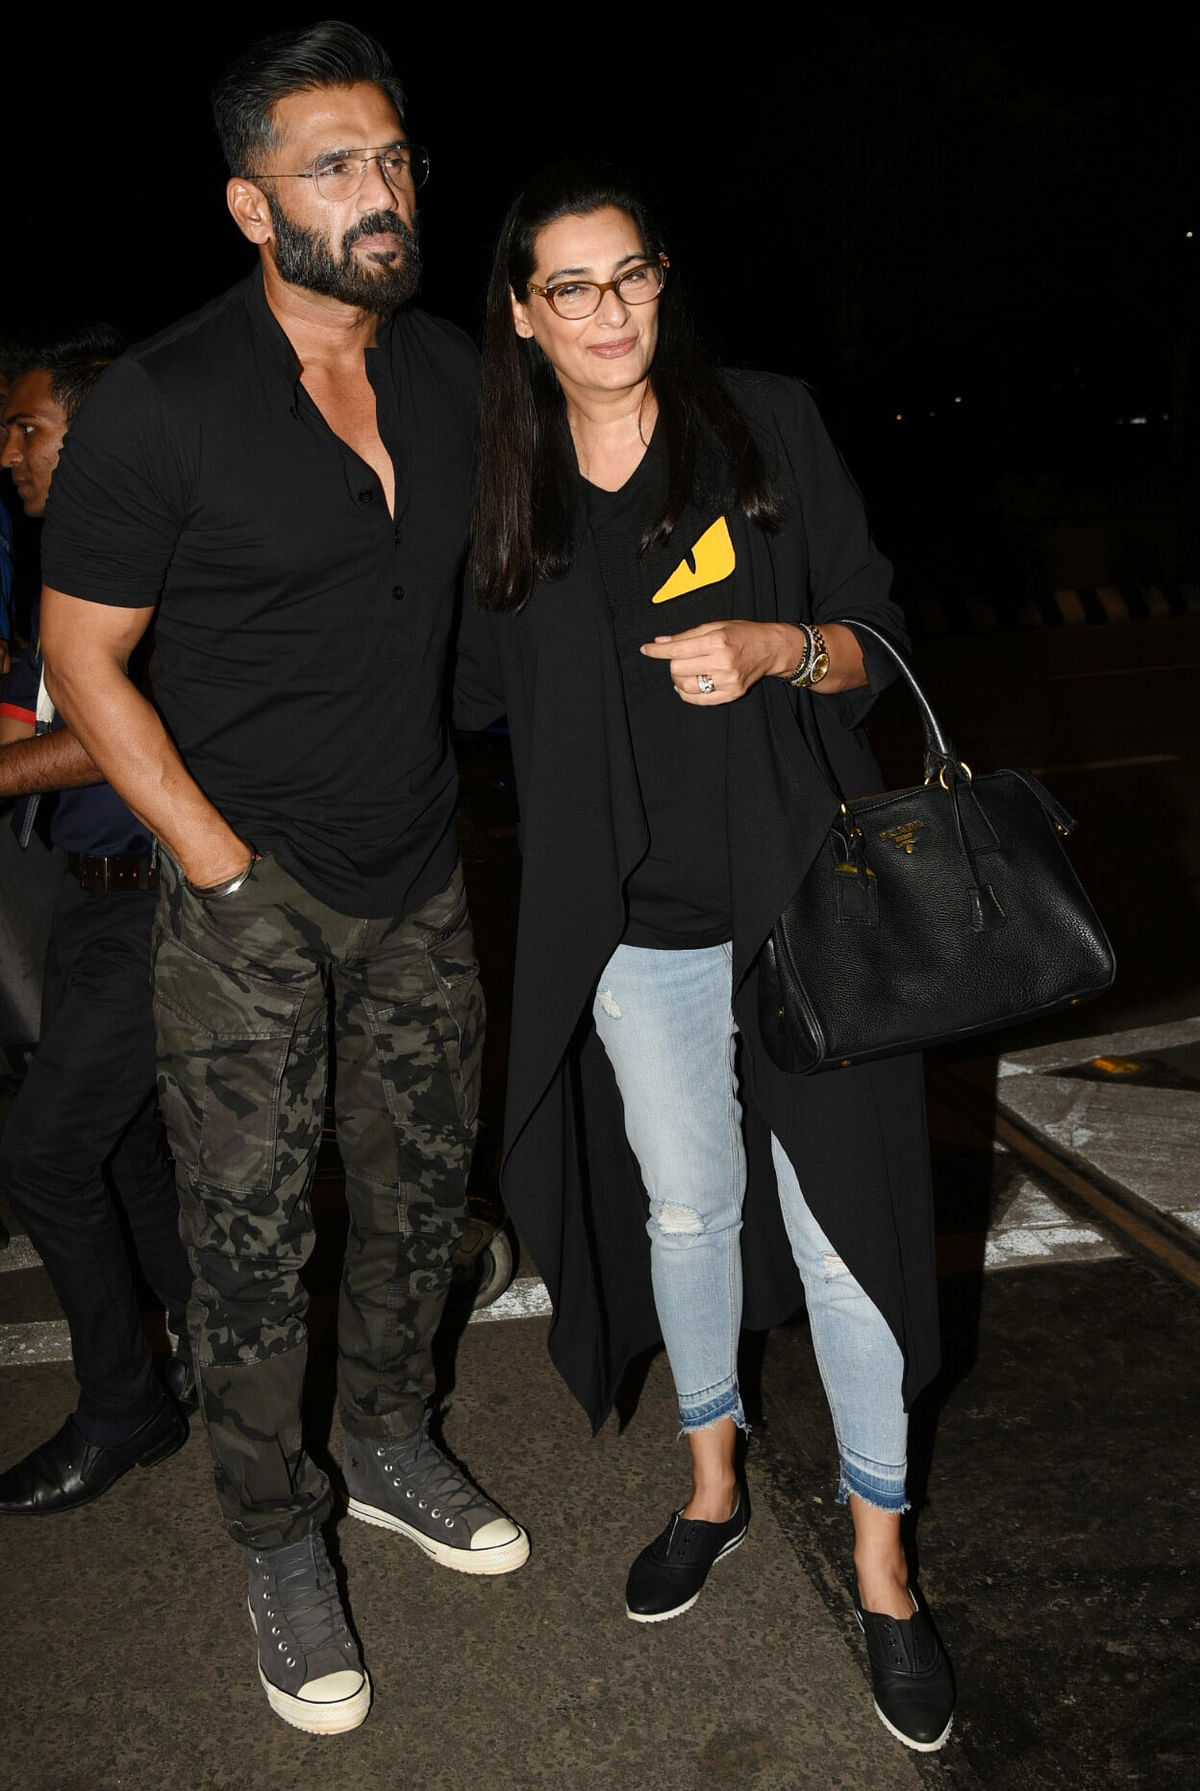 Salman Khan, Alia Bhatt, Helen and Tiger Shroff were spotted at the airport.